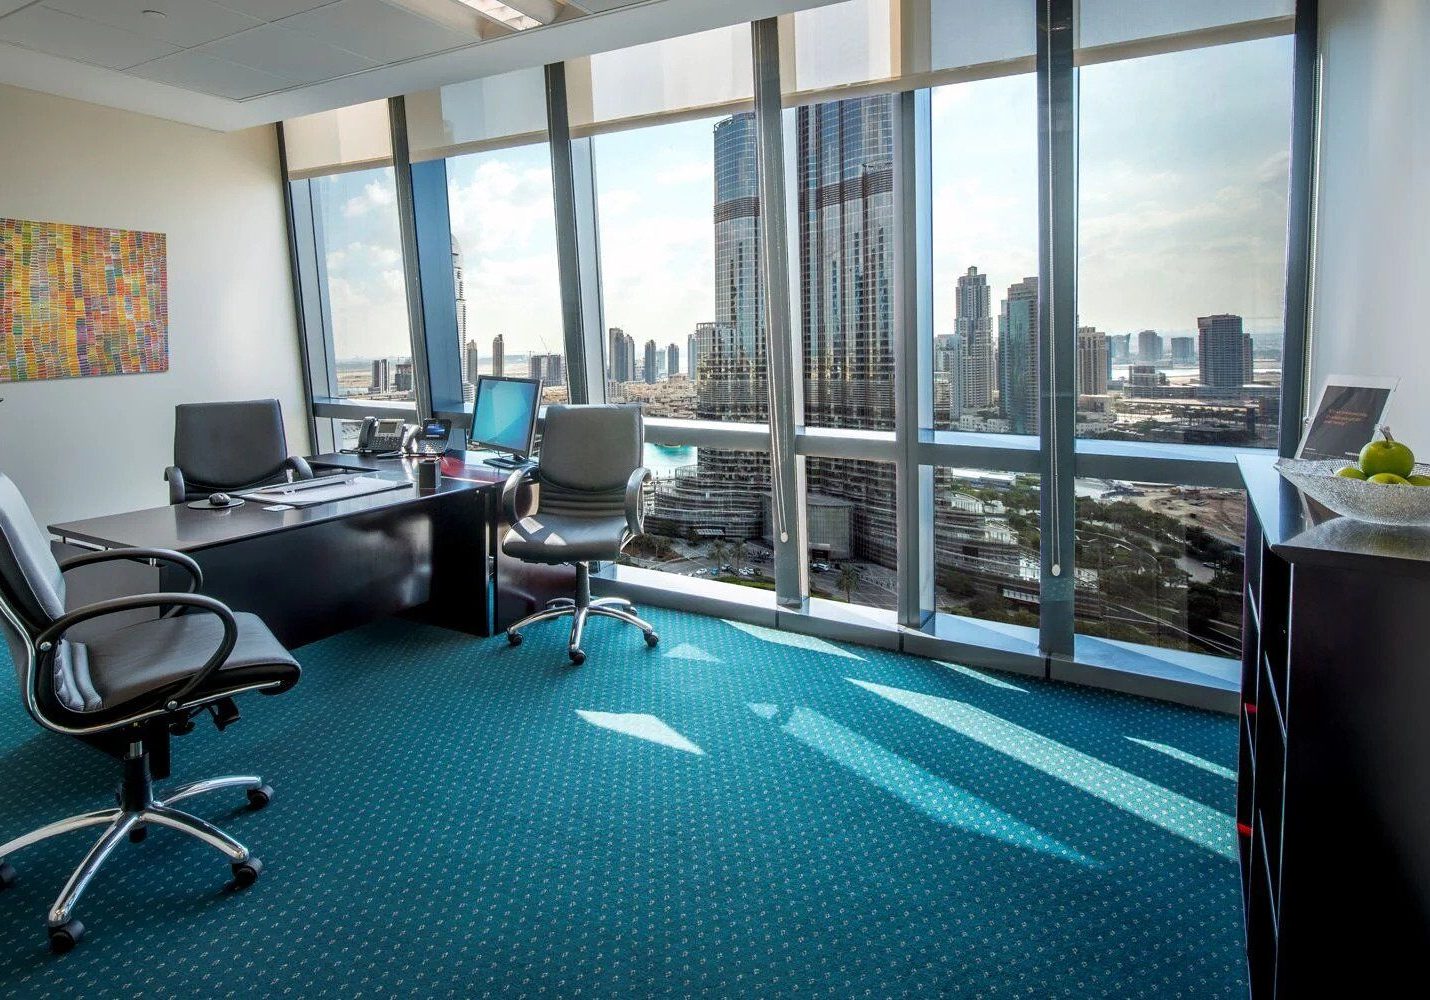 Office Space In Dubai For Rent By West Gate Real Estate Landscape 